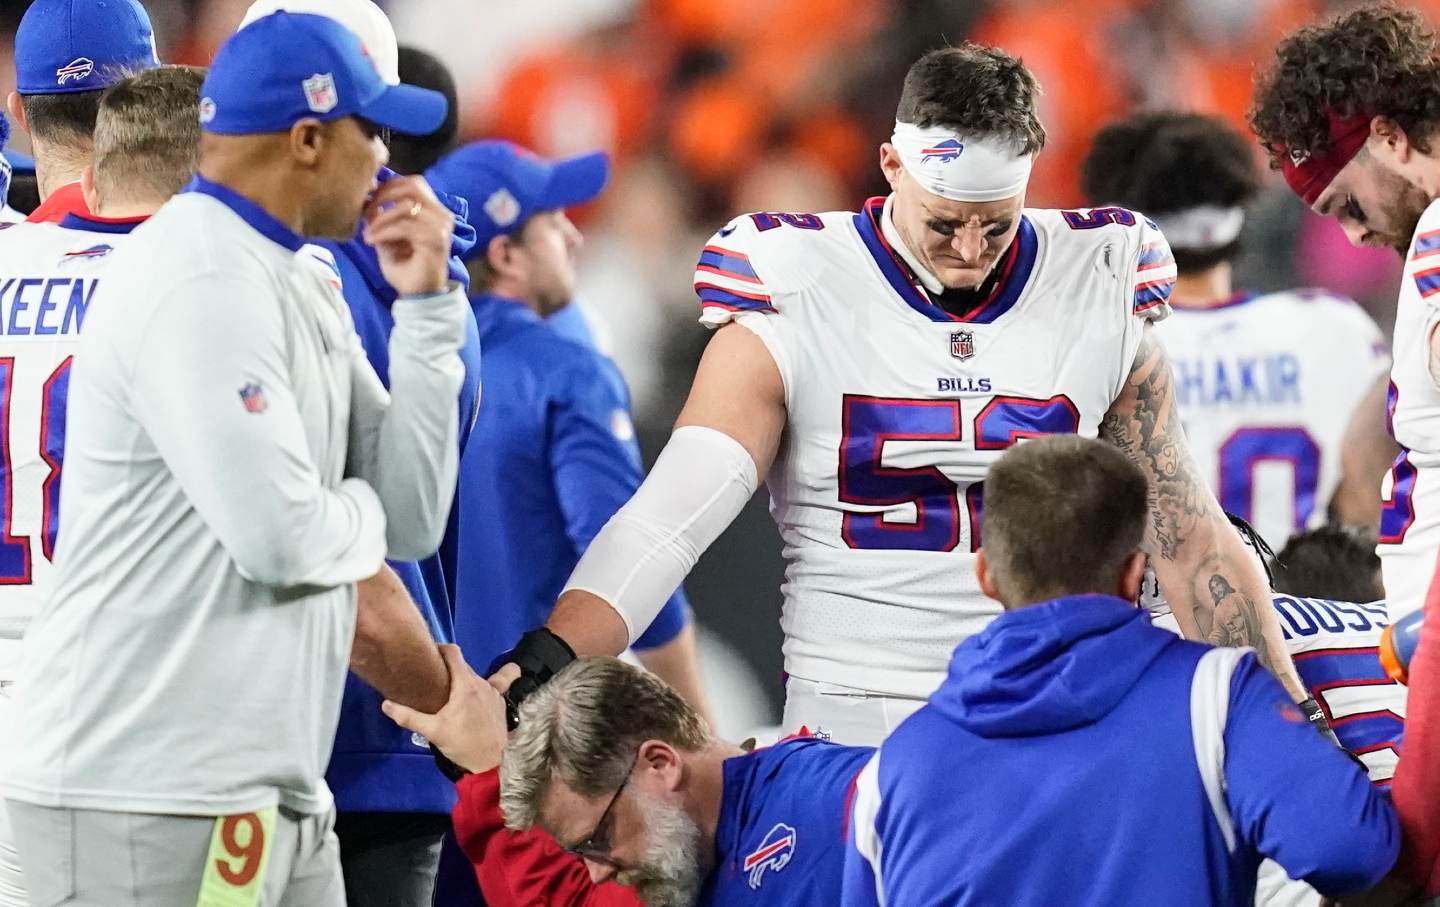 Buffalo Bills players and staff pray for their teammate Damar Hamlin during the first half of an NFL football game against the Cincinnati Bengals, Monday, Jan. 2, 2023, in Cincinnati, which was postponed 59 minutes after Hamlin collapsed.